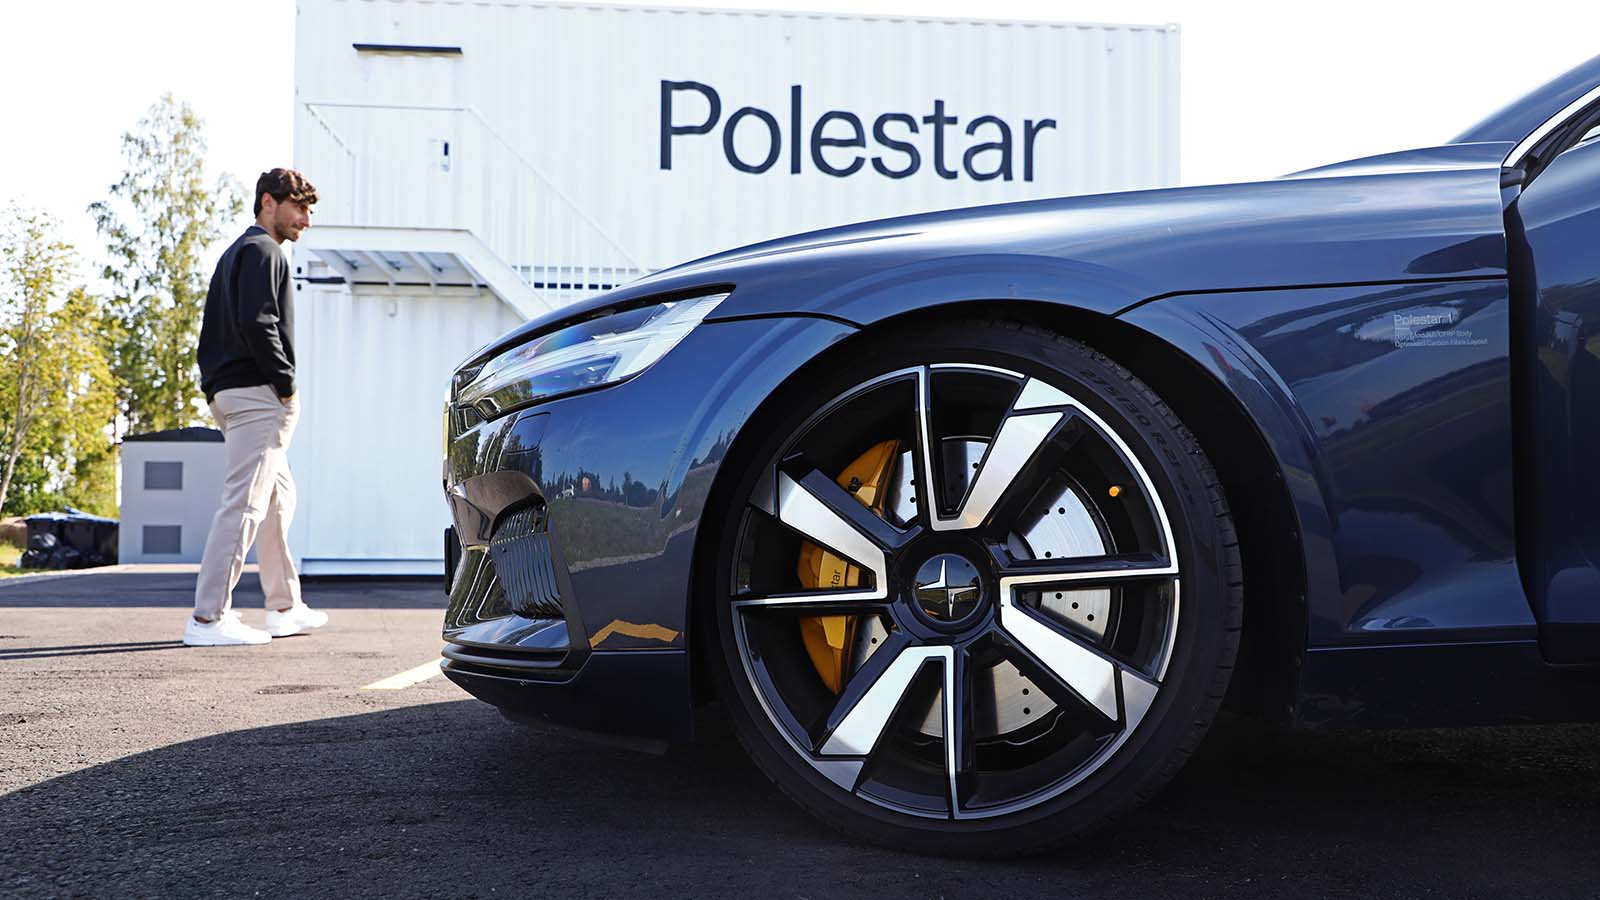 A close up of a Polestar vehicle in front of a company sign representing GGPI Stock.